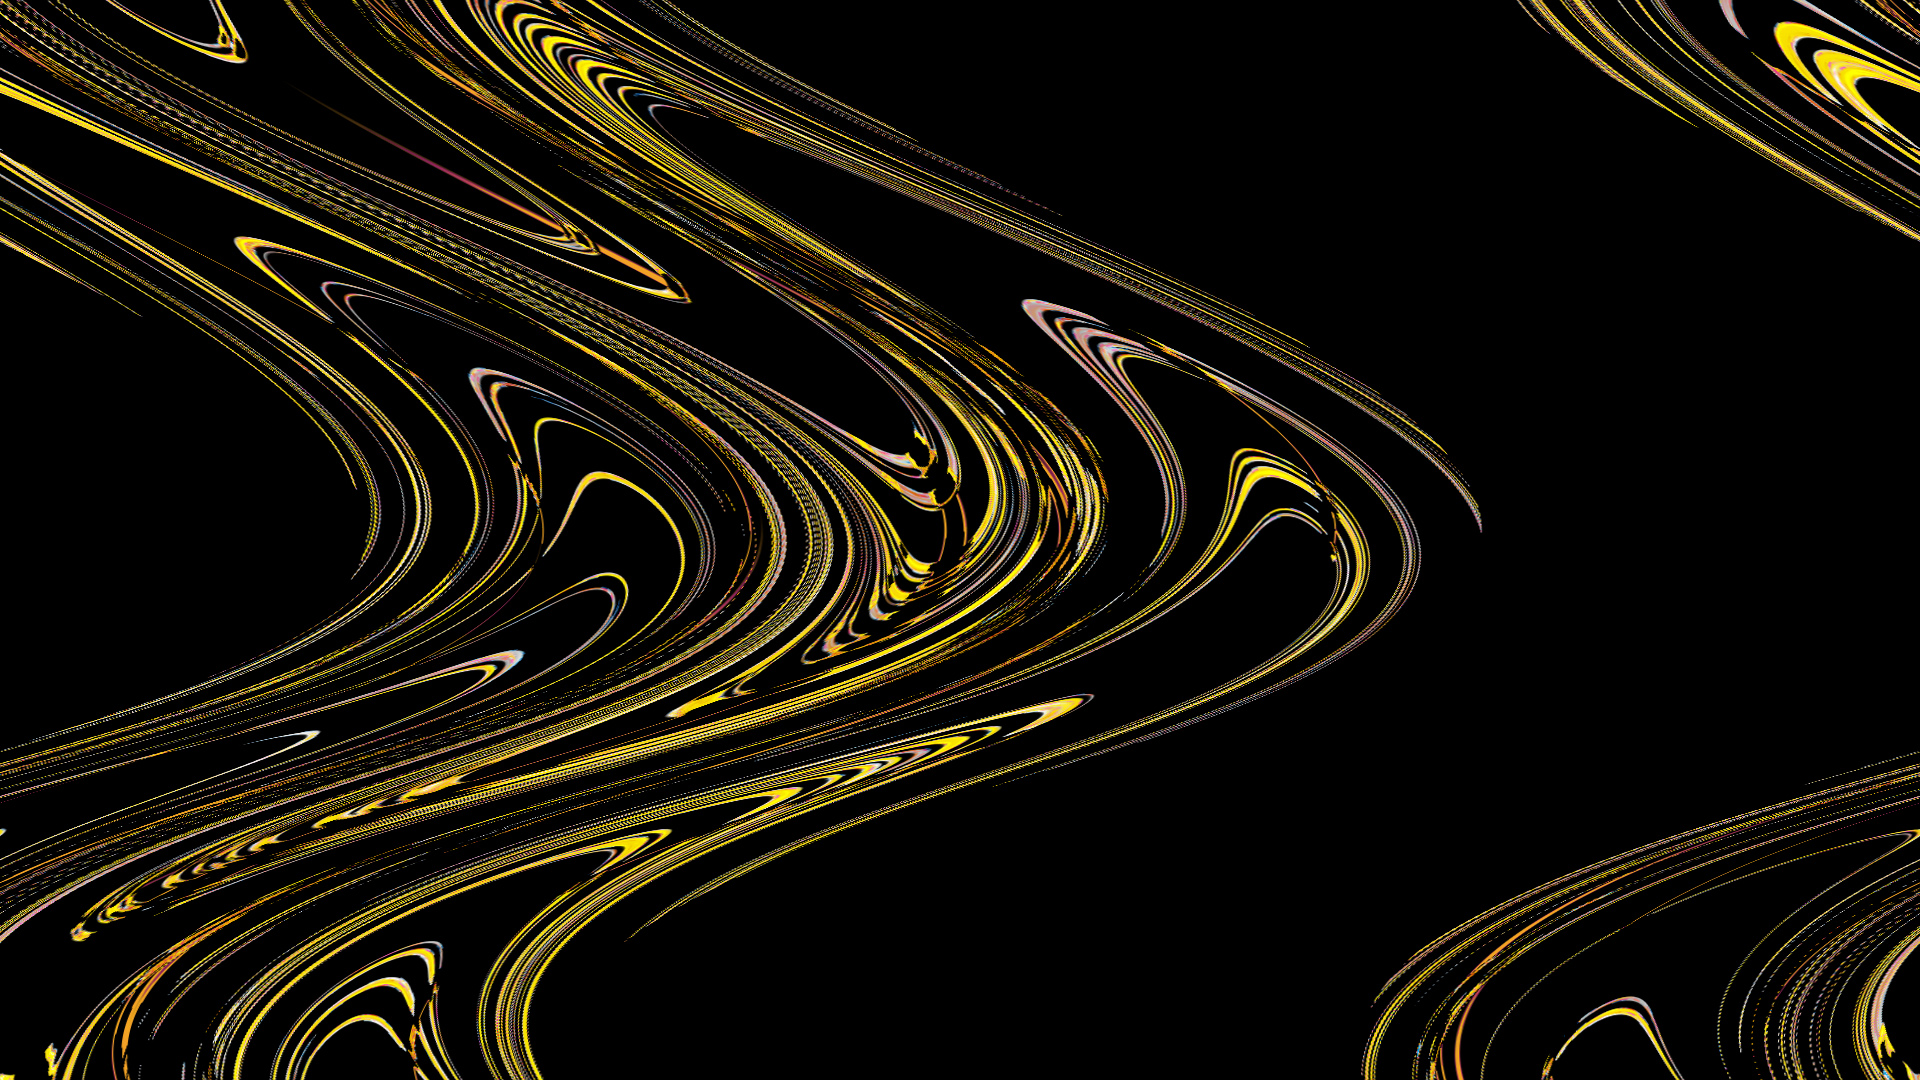 Abstract Artistic Curves Digital Art Yellow 1920x1080